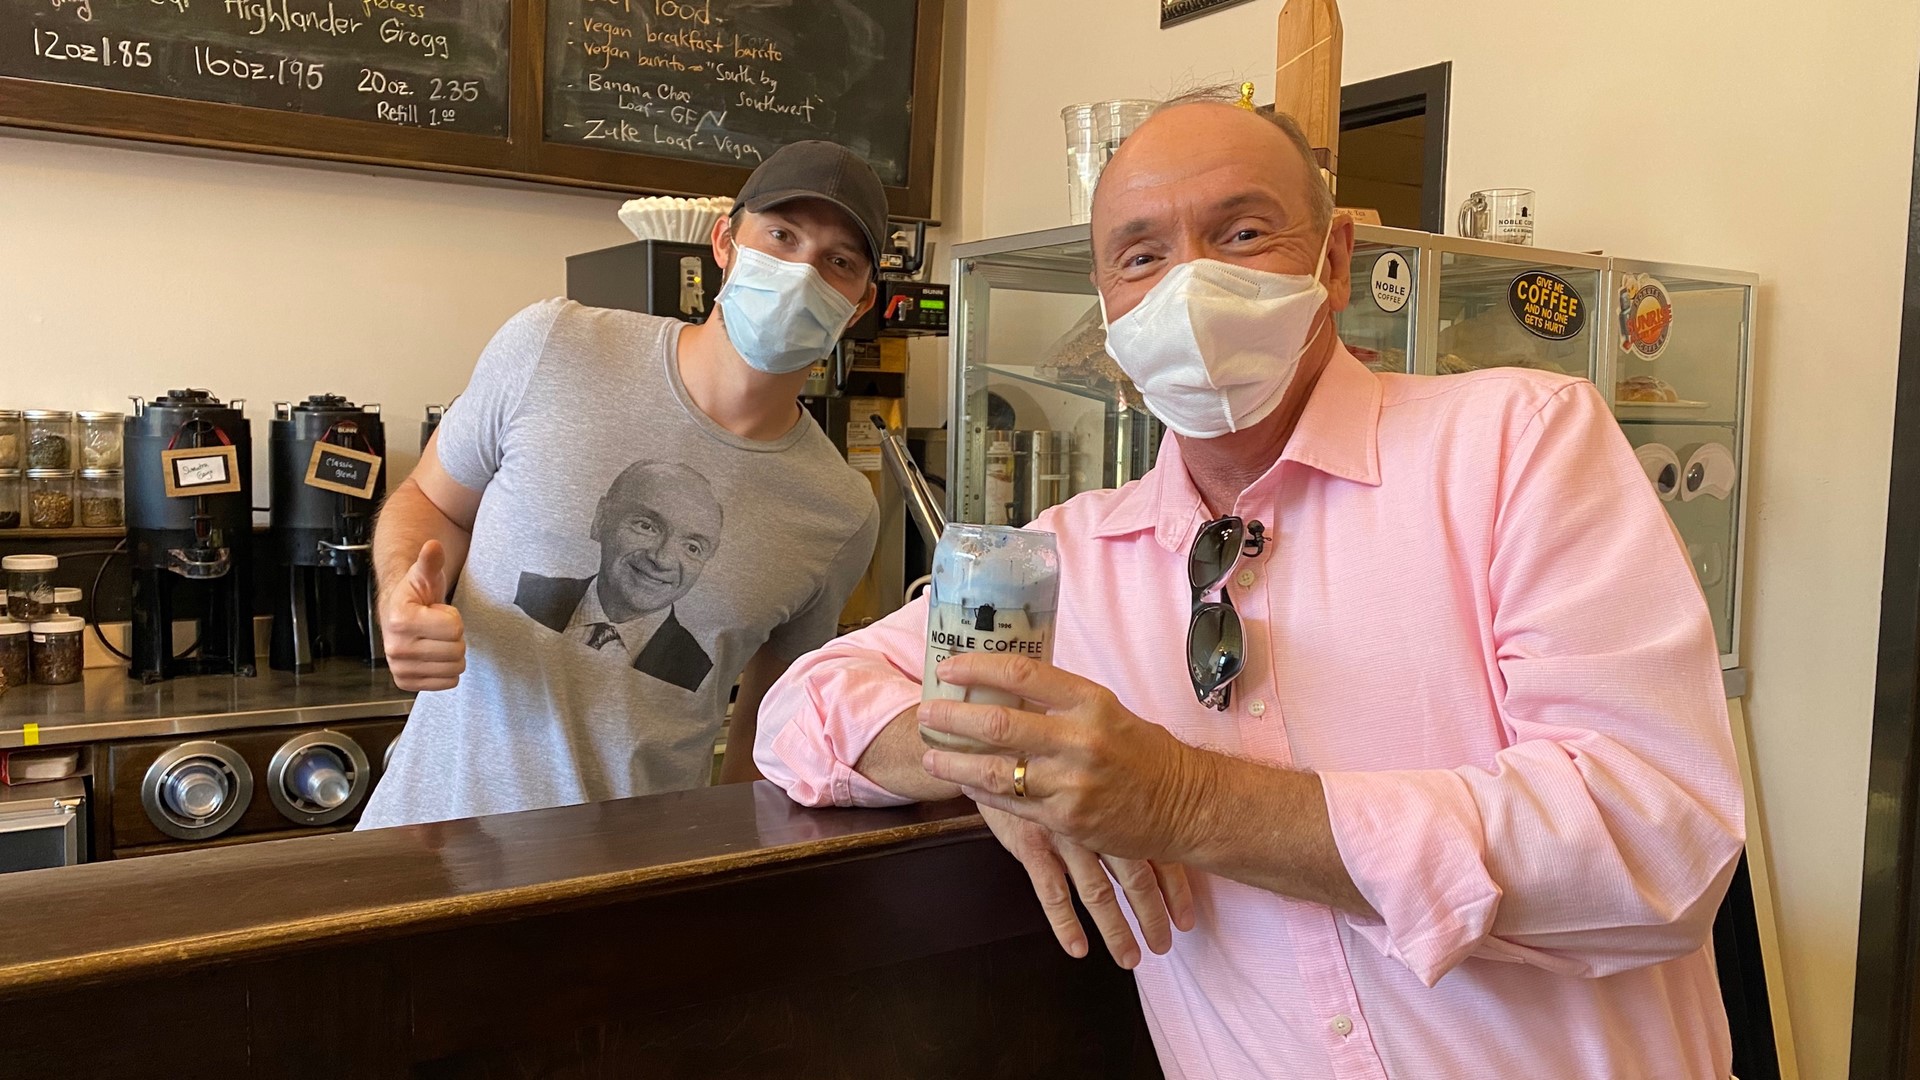 Chuck's Town Square Tour visited Noblesville last fall. He checked back with some of those small businesses to see how they're dealing with the pandemic.